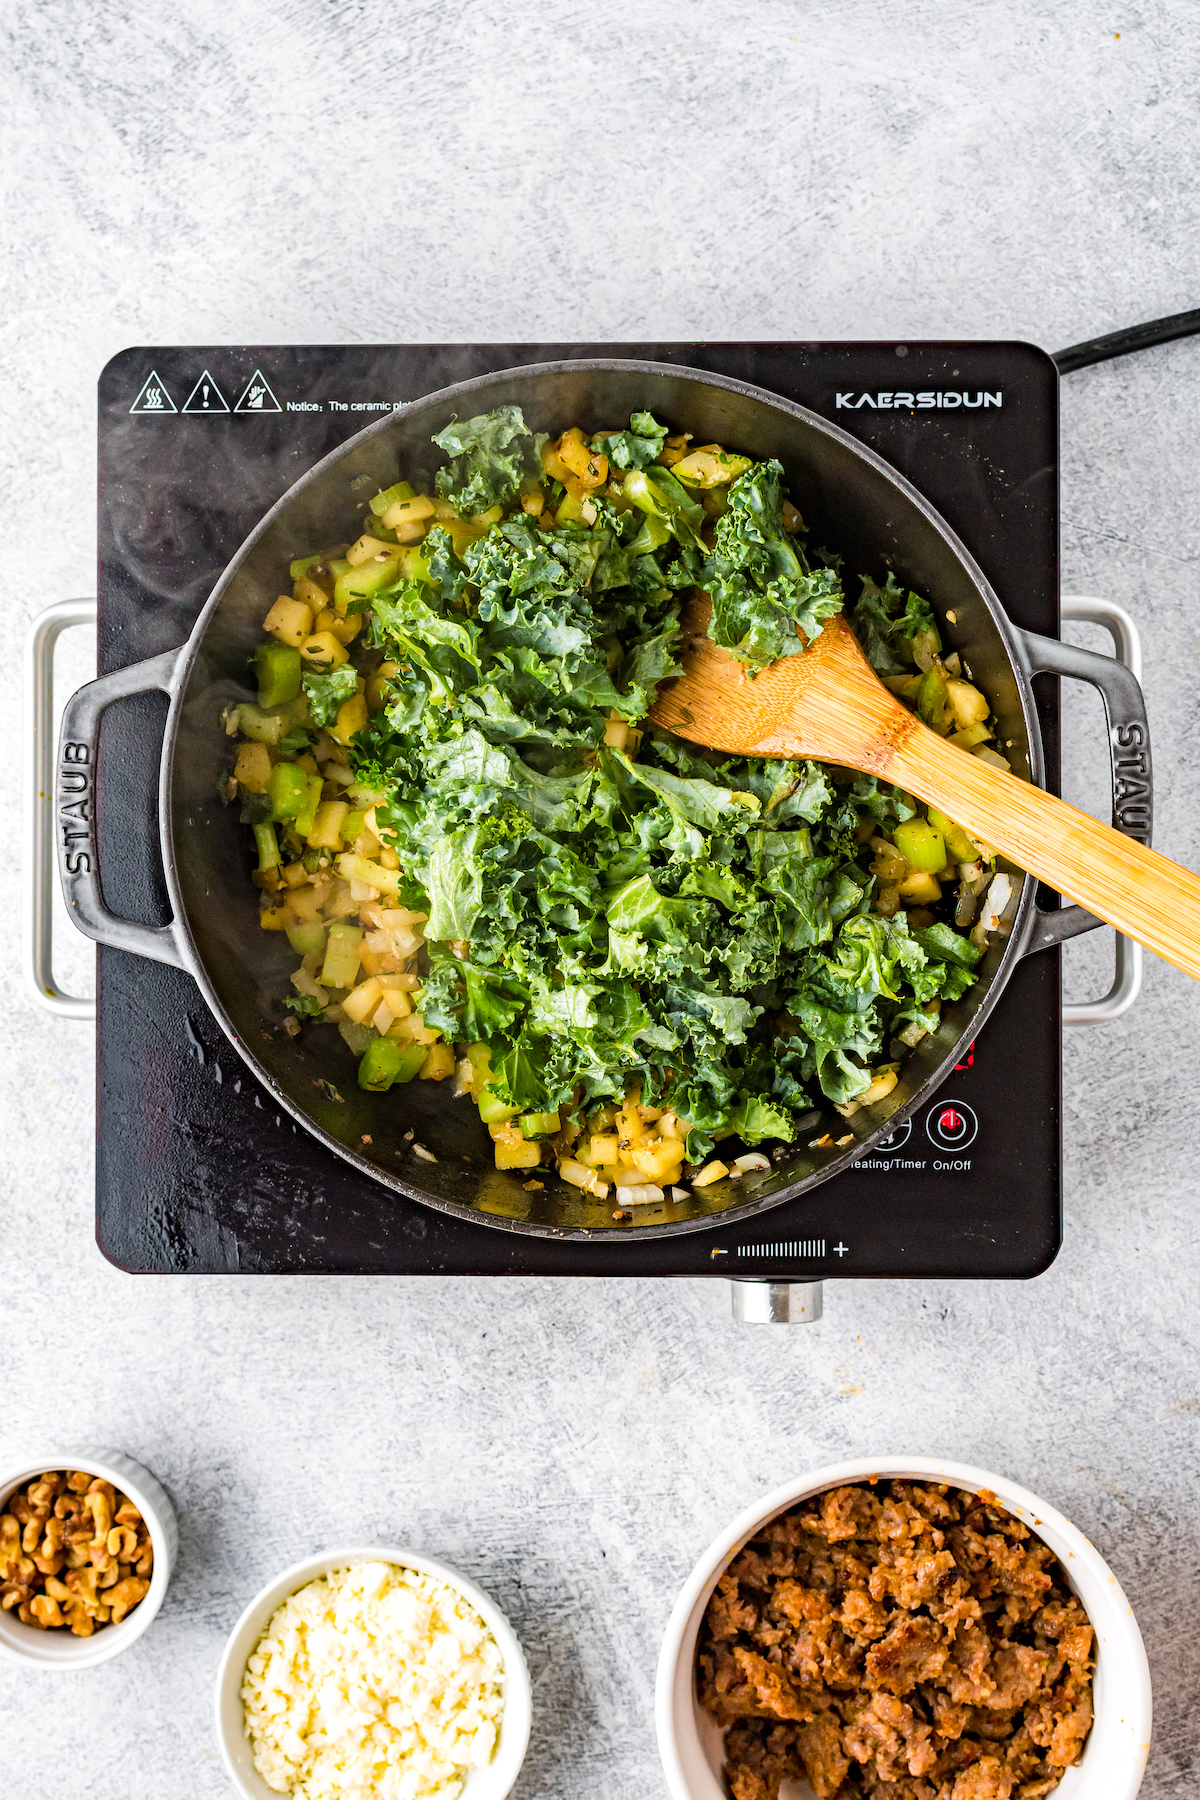 A skillet with apples, kale, onions, and other sausage filling ingredients. Cooked sausage in a bowl, as well as feta and chopped nuts, are nearby on the tabletop.